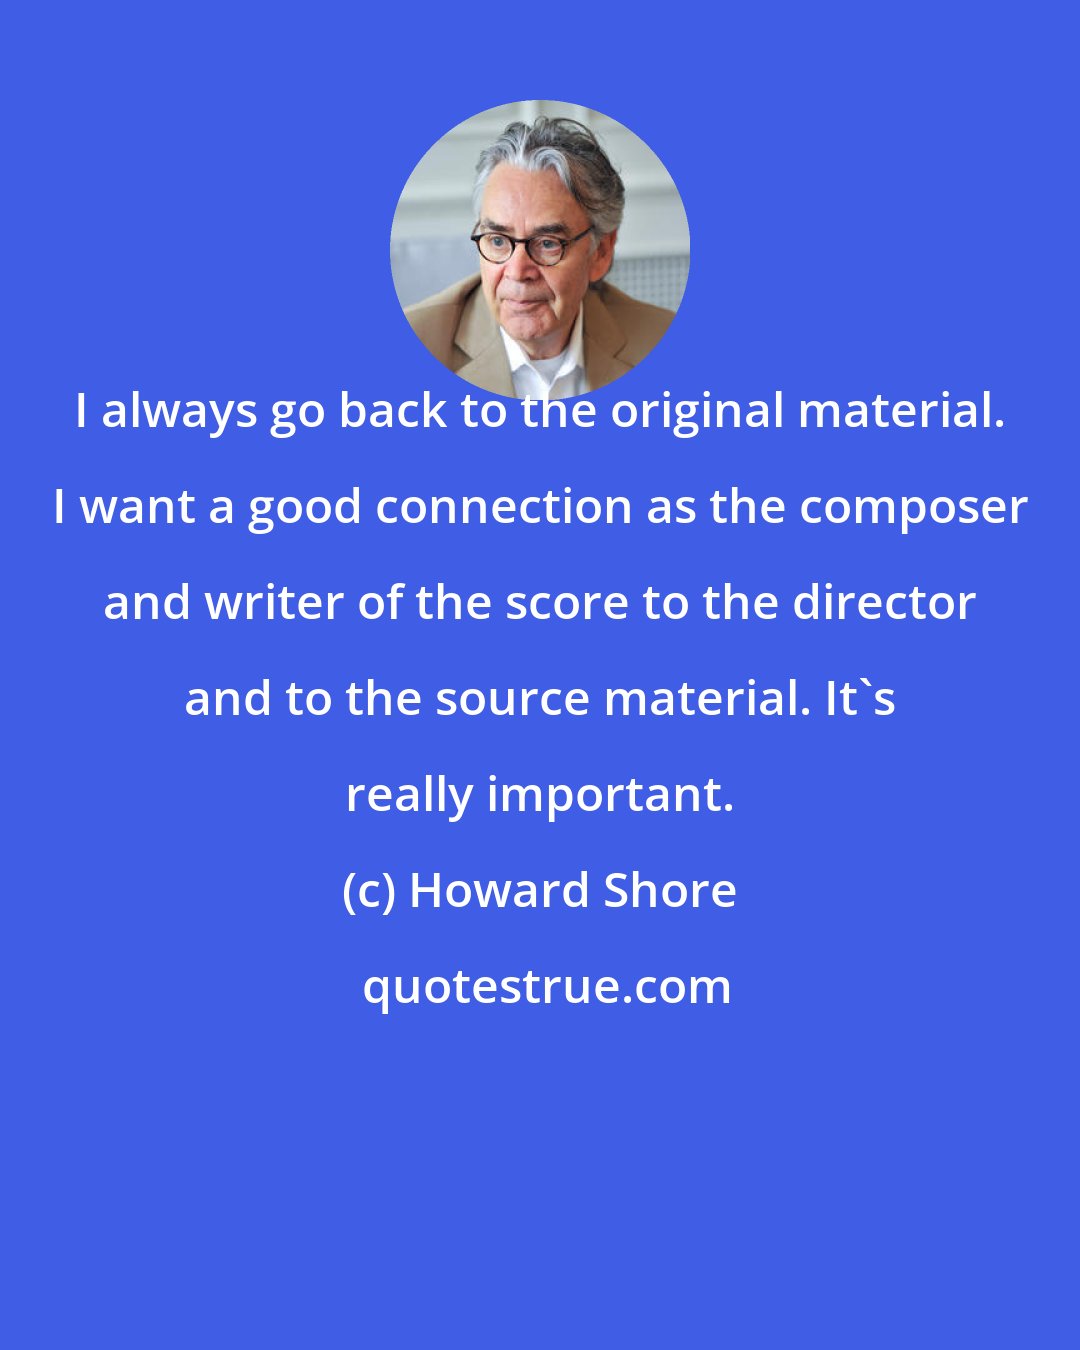 Howard Shore: I always go back to the original material. I want a good connection as the composer and writer of the score to the director and to the source material. It's really important.